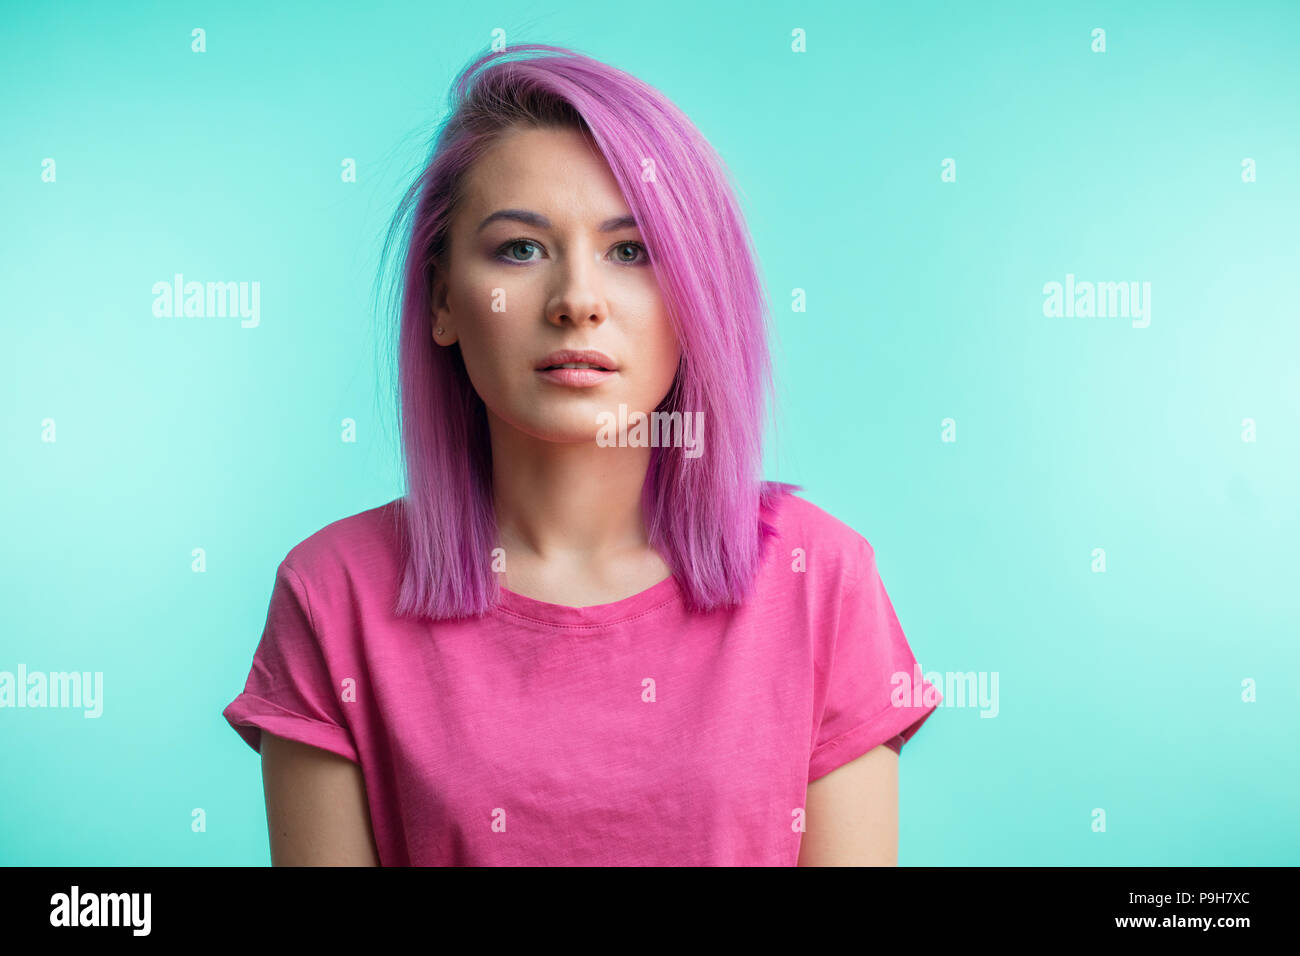 Head and shoulders portrait of caucasian young woman with pink hair, perfect fresh clean skin looking at camera with calm, serious expression over blu Stock Photo